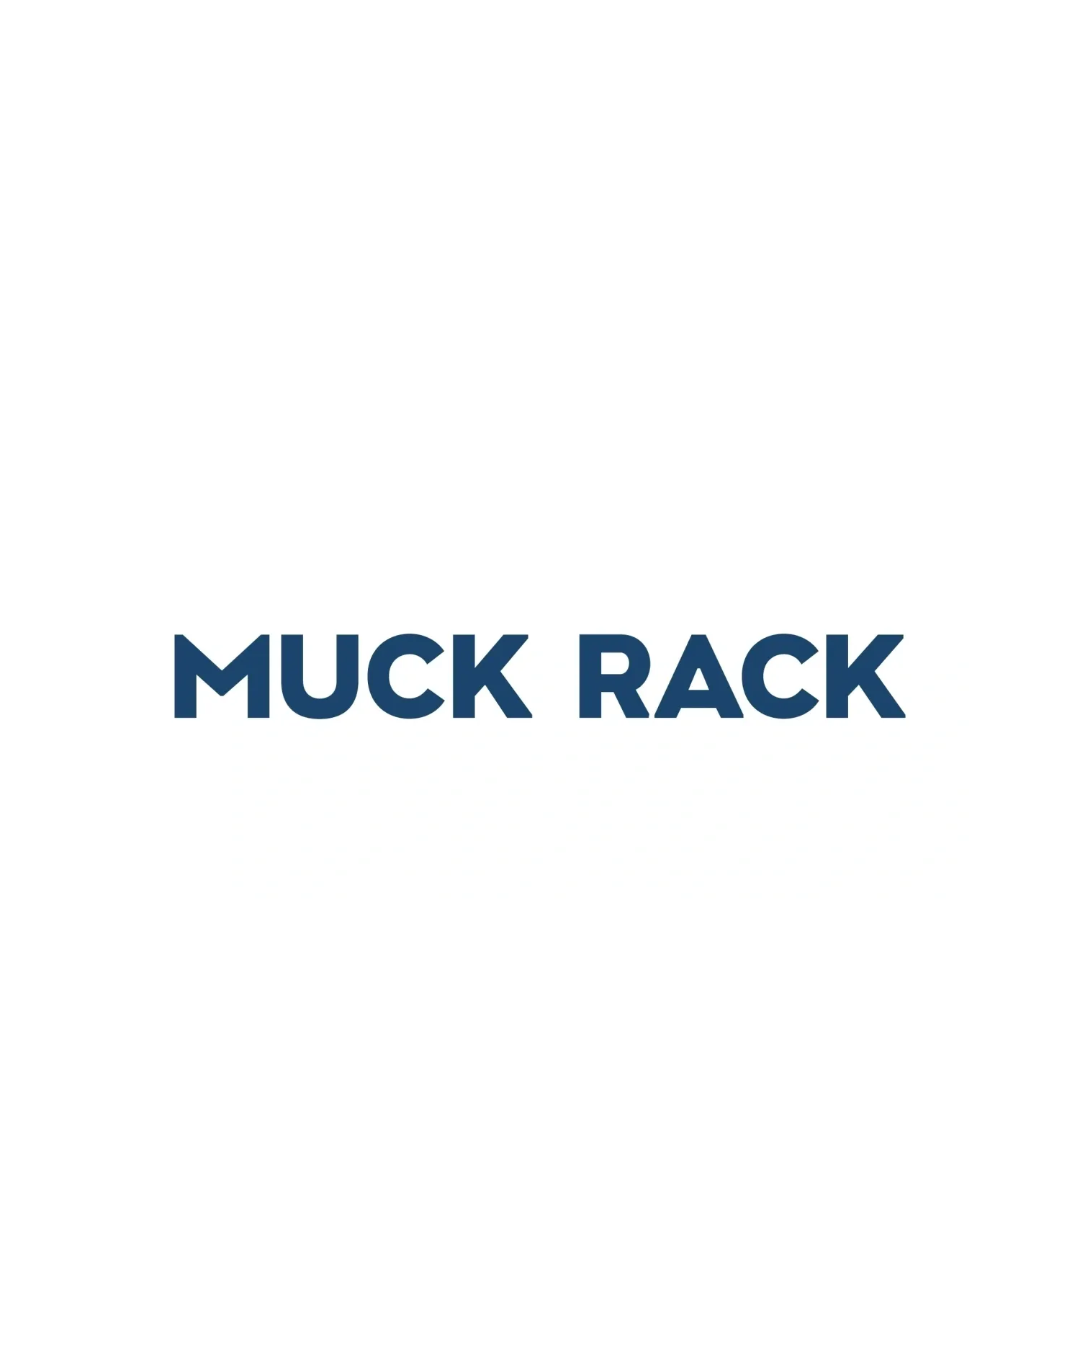 Muck Rack Named to Inc. 5000